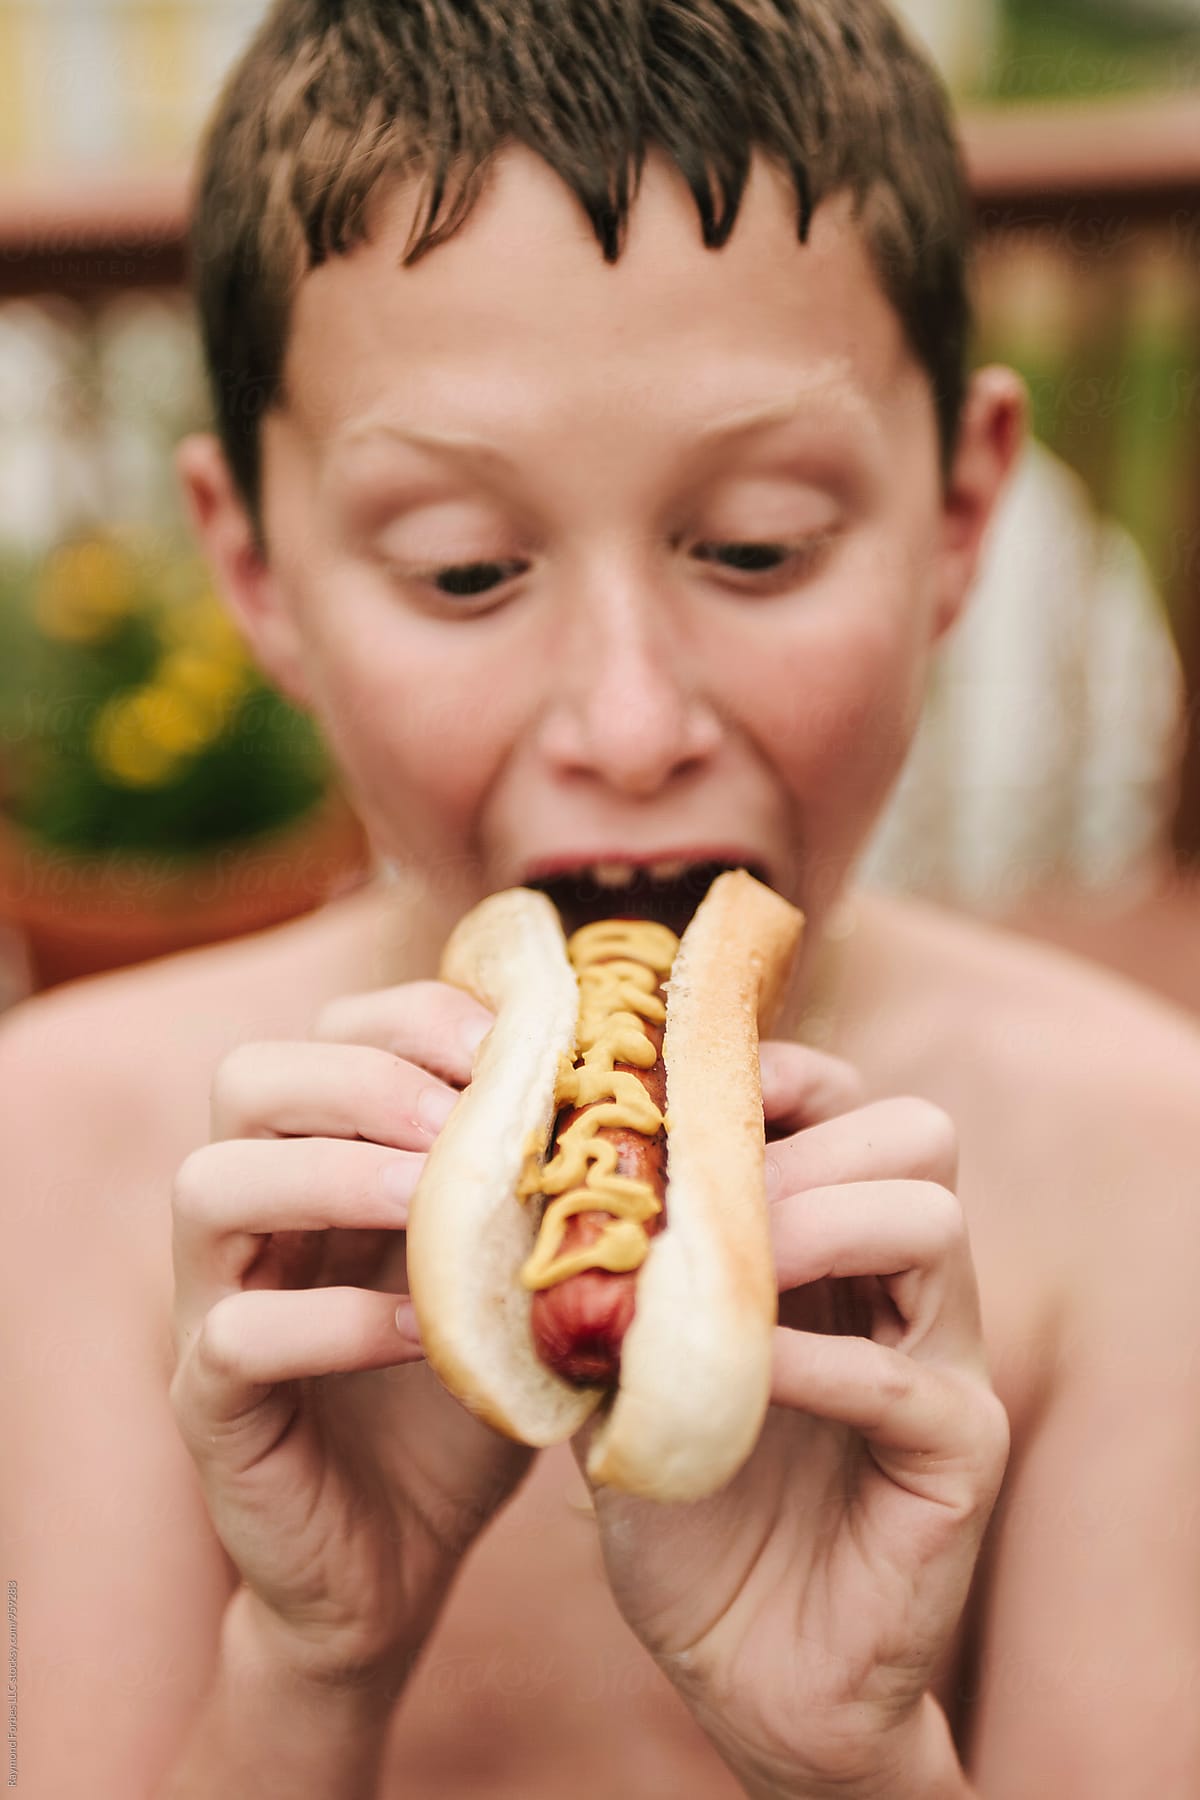 Child Eating Hot Dog at Summer Barbecue